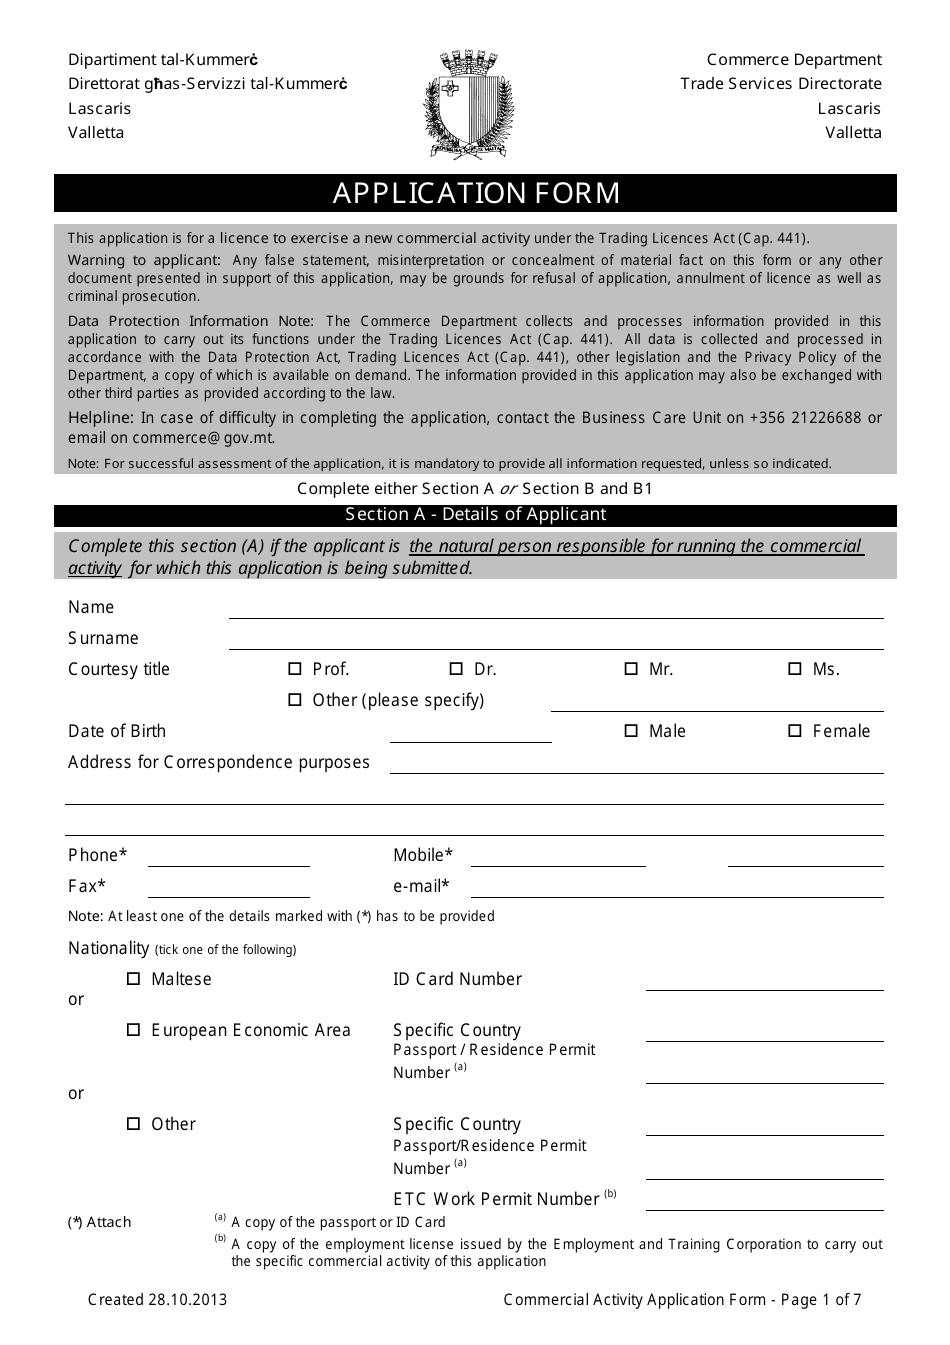 Application Form for a Commercial Activity - Valletta, Malta, Page 1